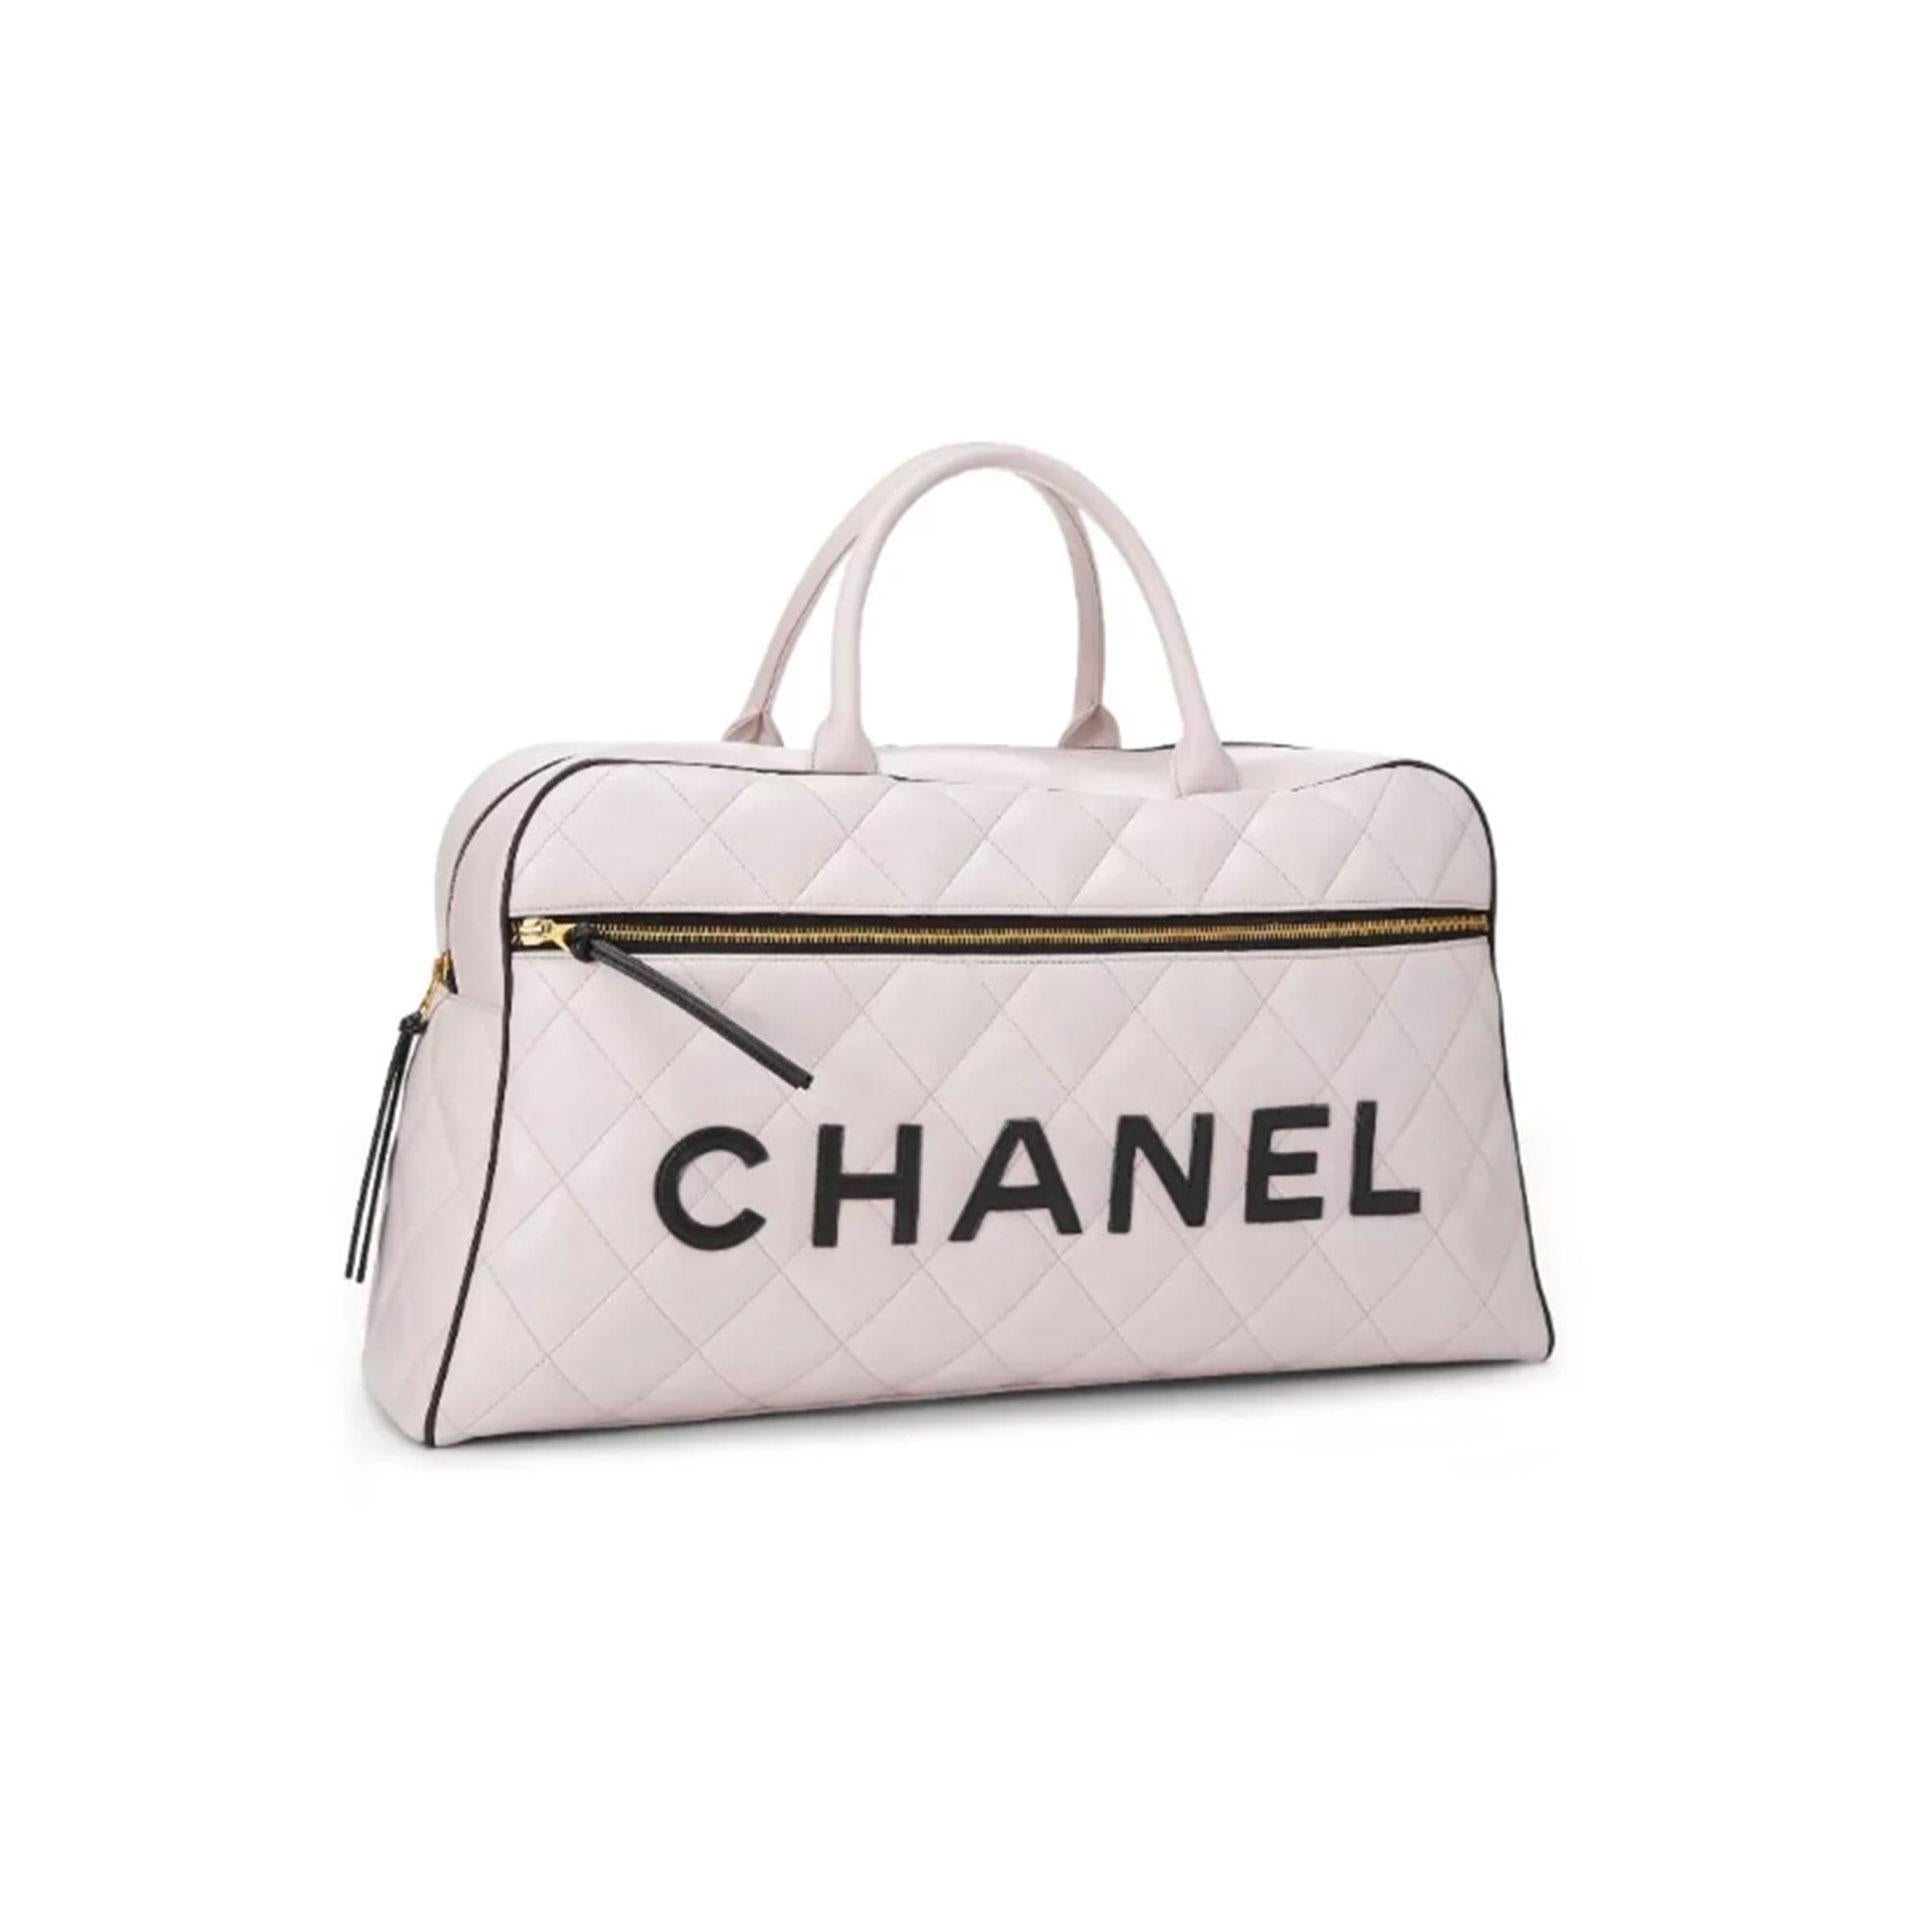 Chanel Limited Edition Vintage Duffel Tote White and Black Leather ...